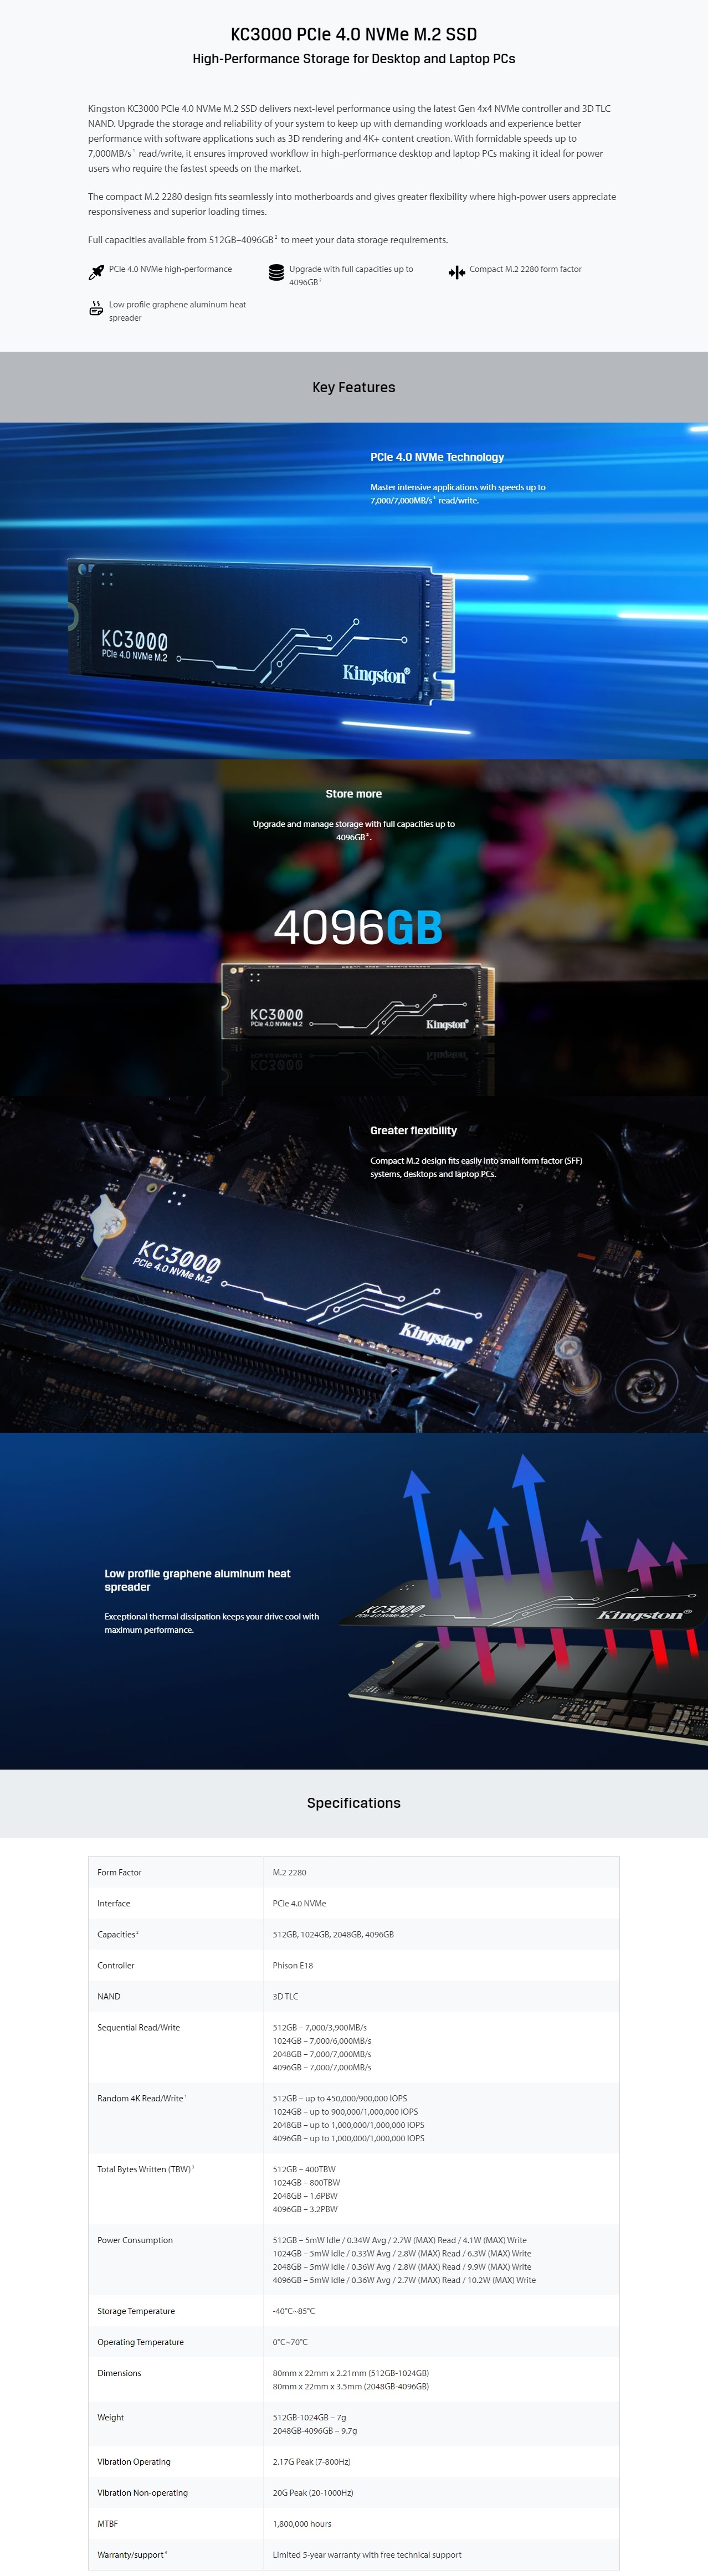 A large marketing image providing additional information about the product Kingston KC3000 PCIe Gen4 NVMe M.2 SSD - 4TB - Additional alt info not provided